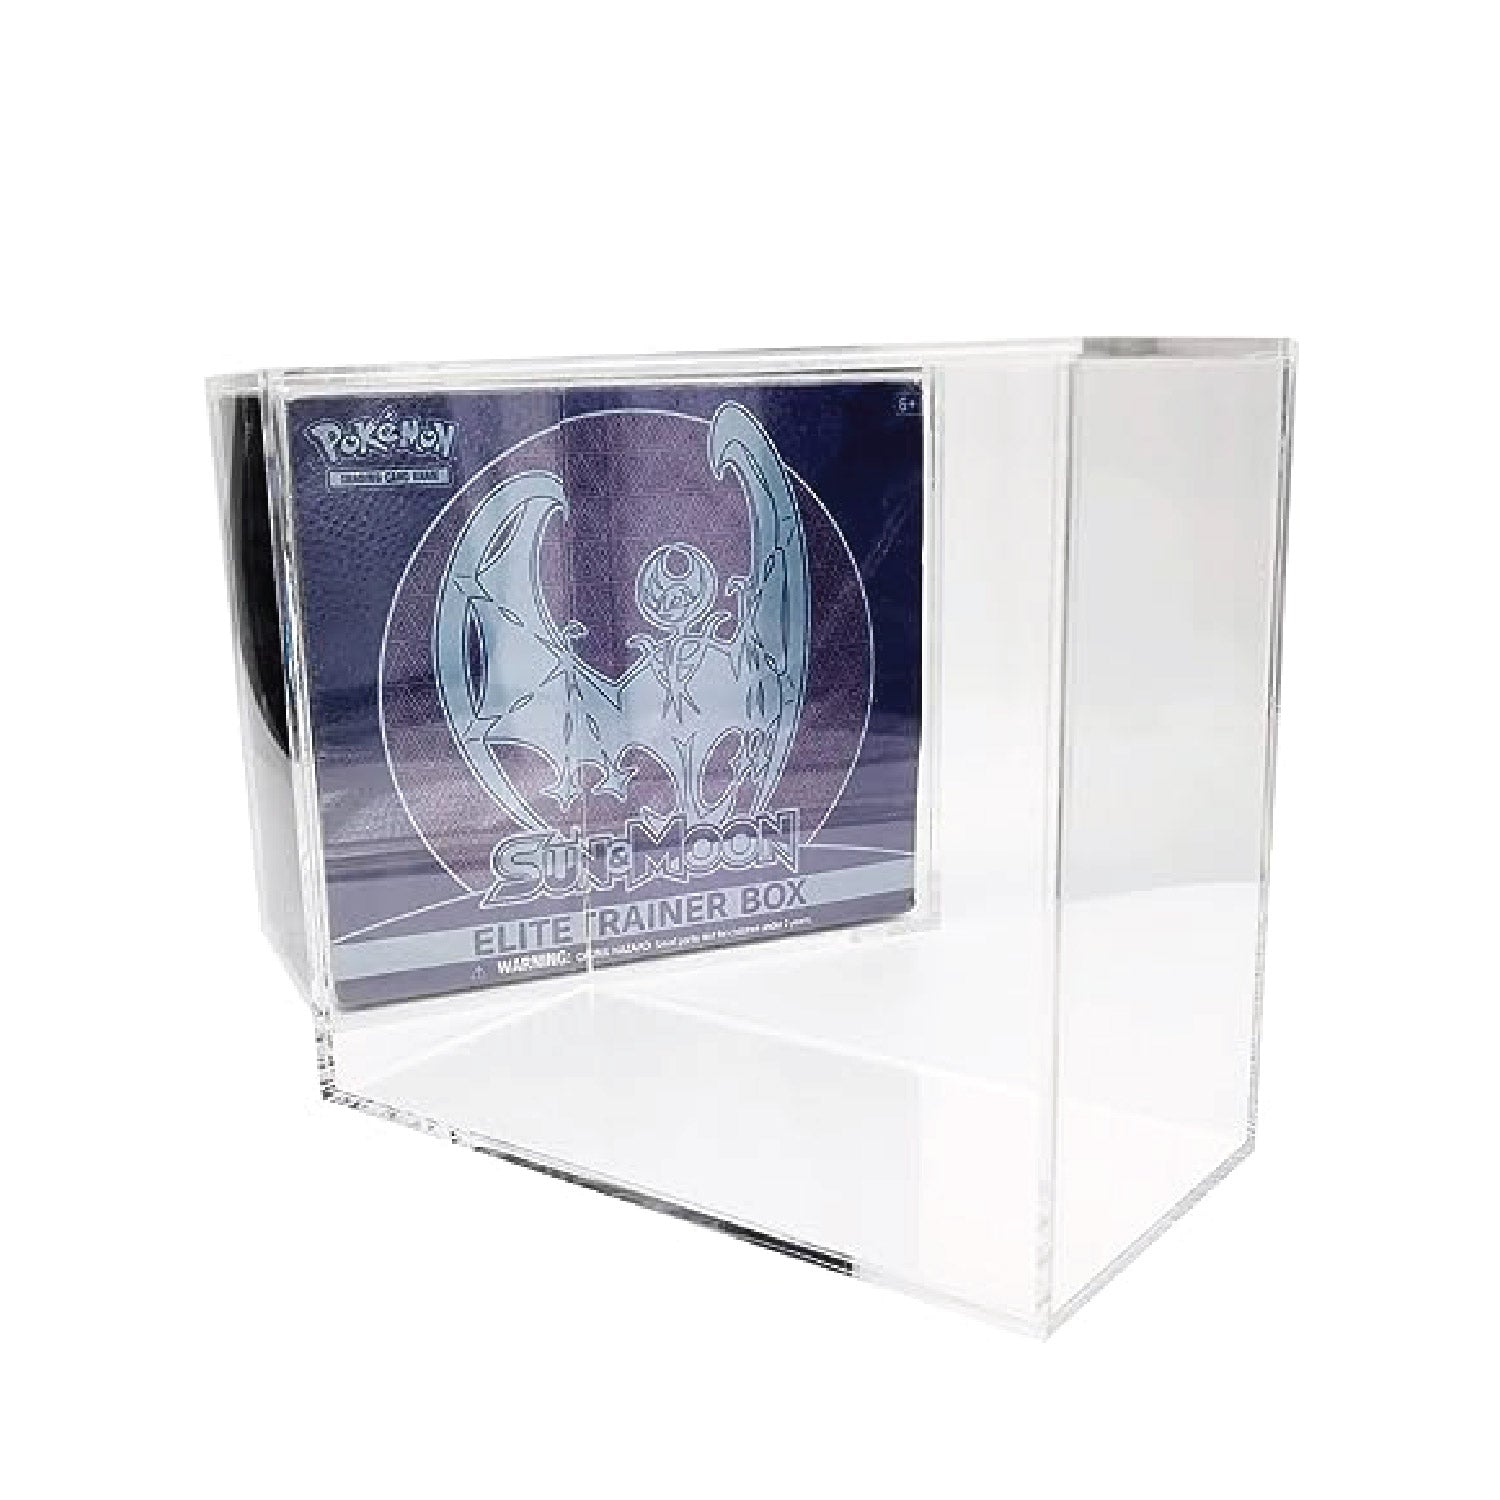 ETB Acrilic Box Protector - 125x136x77mm for Pokemon - The Ultimate Protection for Your Best Collectibles - Friki Monkey